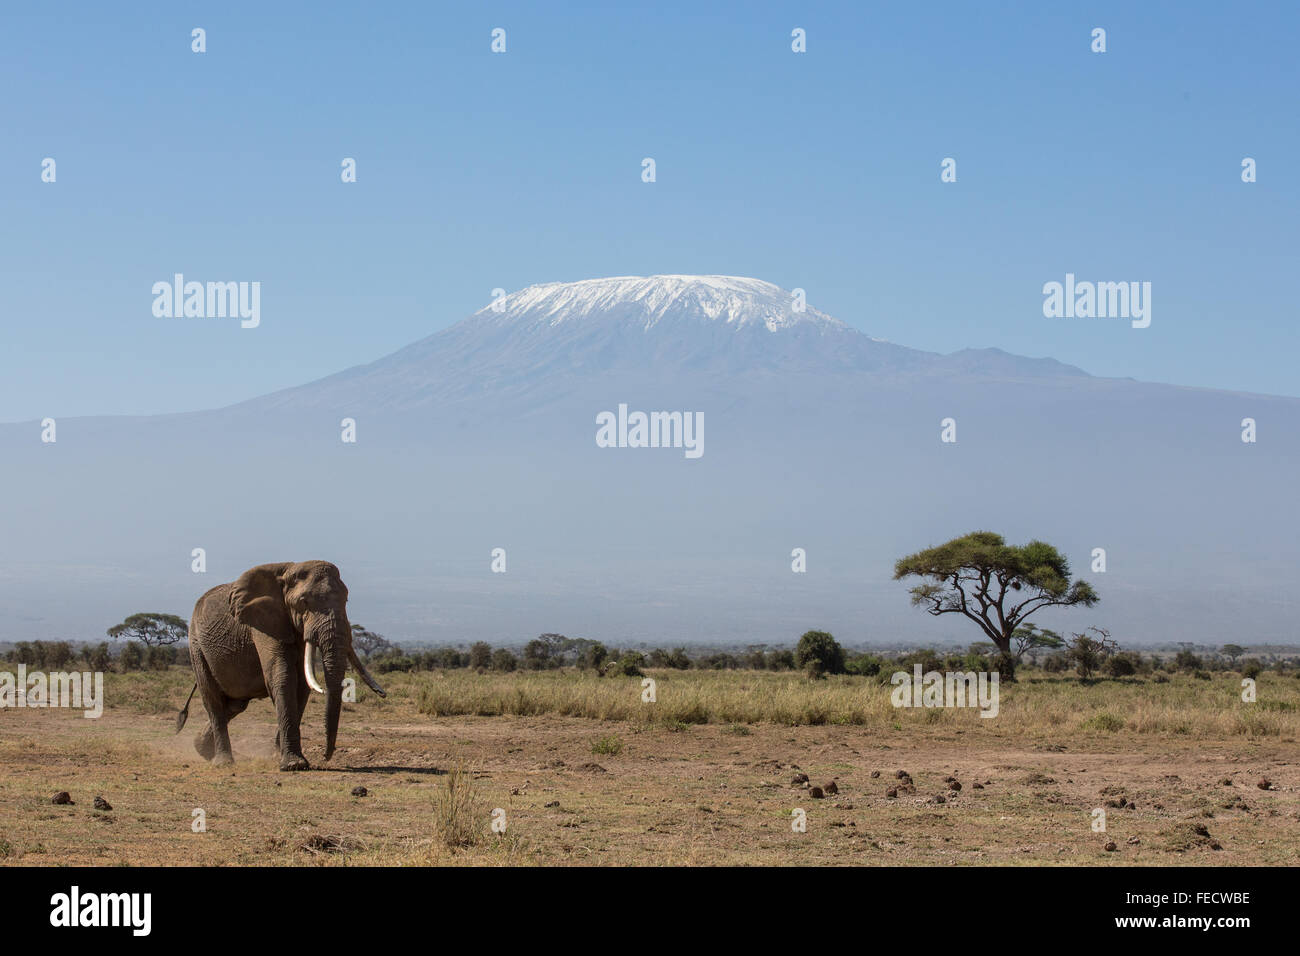 One adult bull elephant walking in Amboseli with snowcapped Mount Kilimanjaro in the background Stock Photo